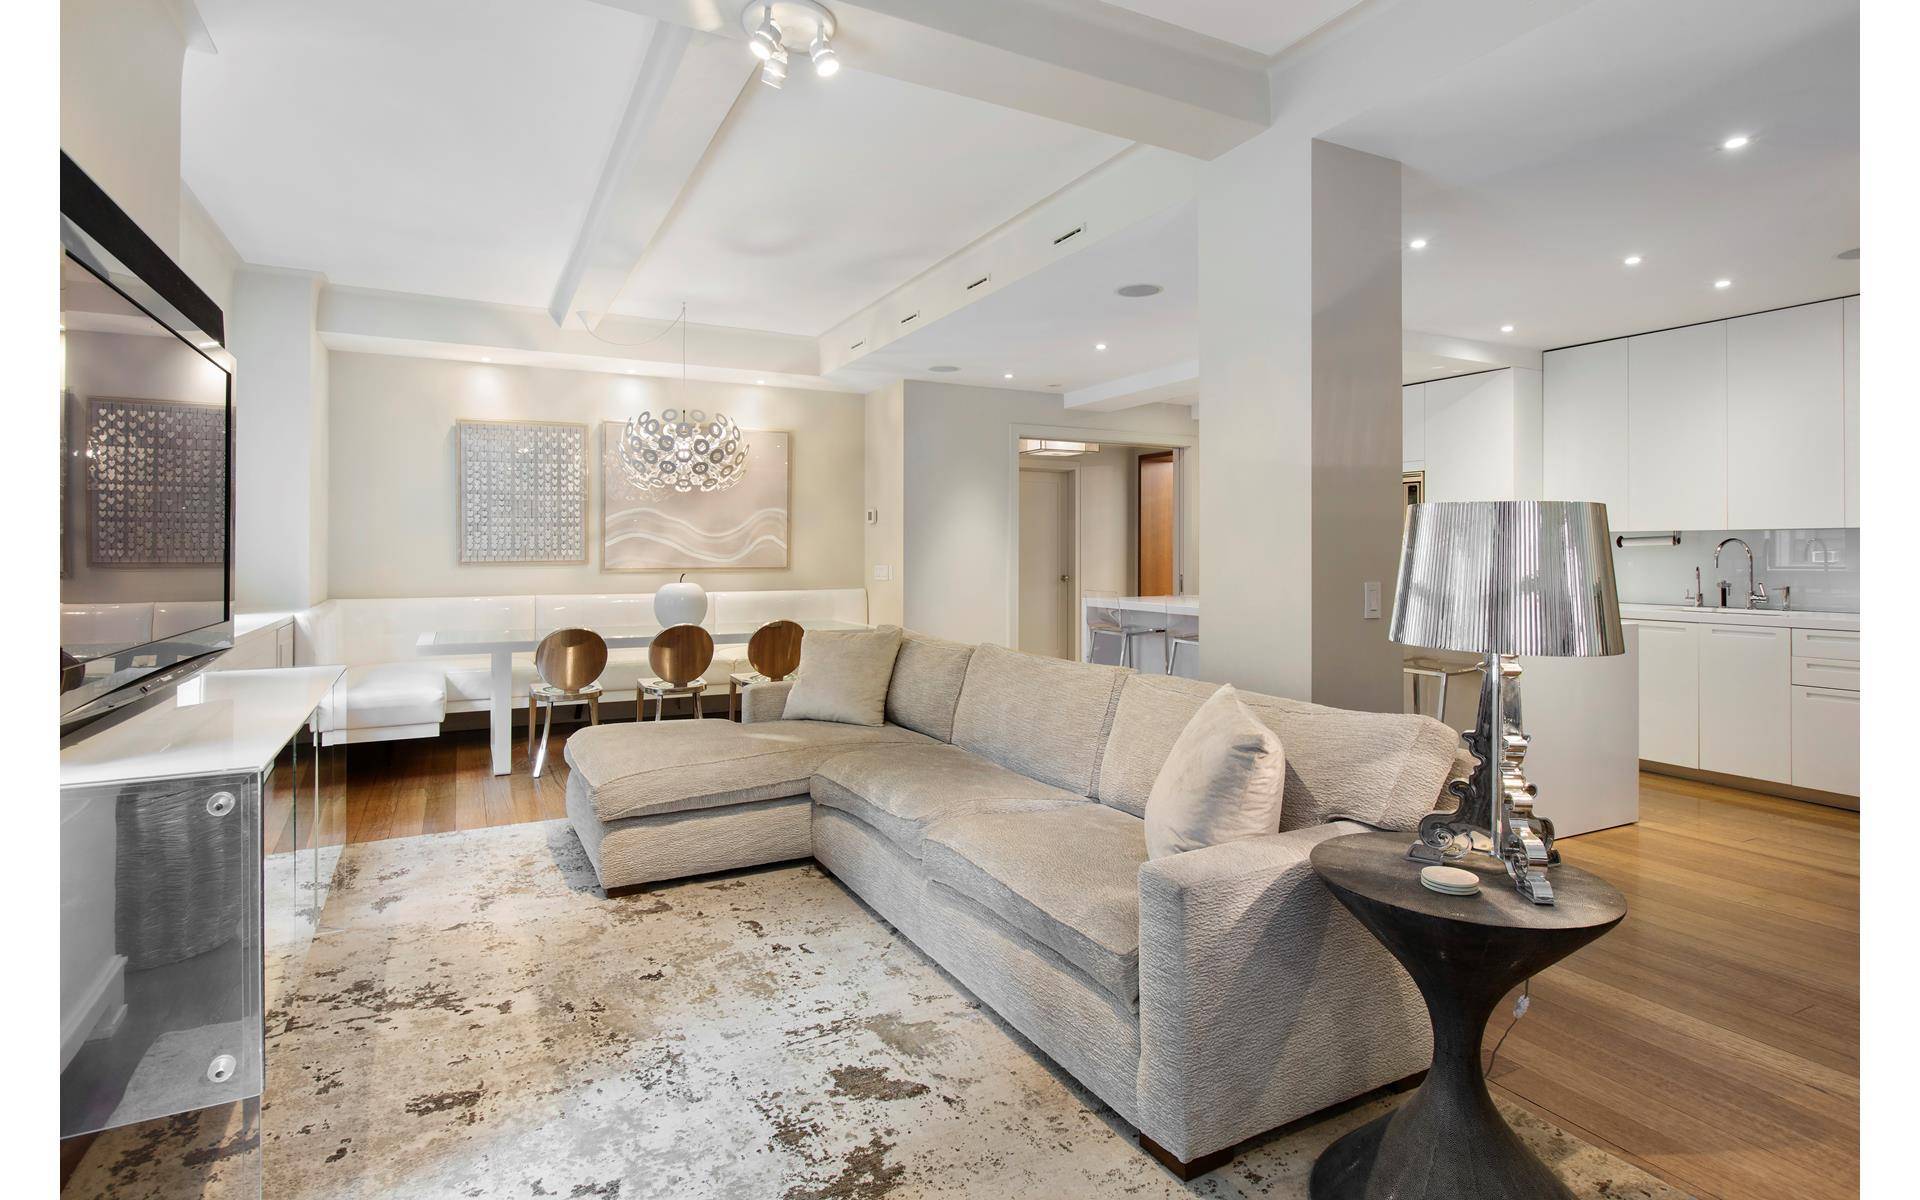 Welcome home to 595 West End Avenue, a boutique pre war condominium with direct elevator access into your duplex residence.